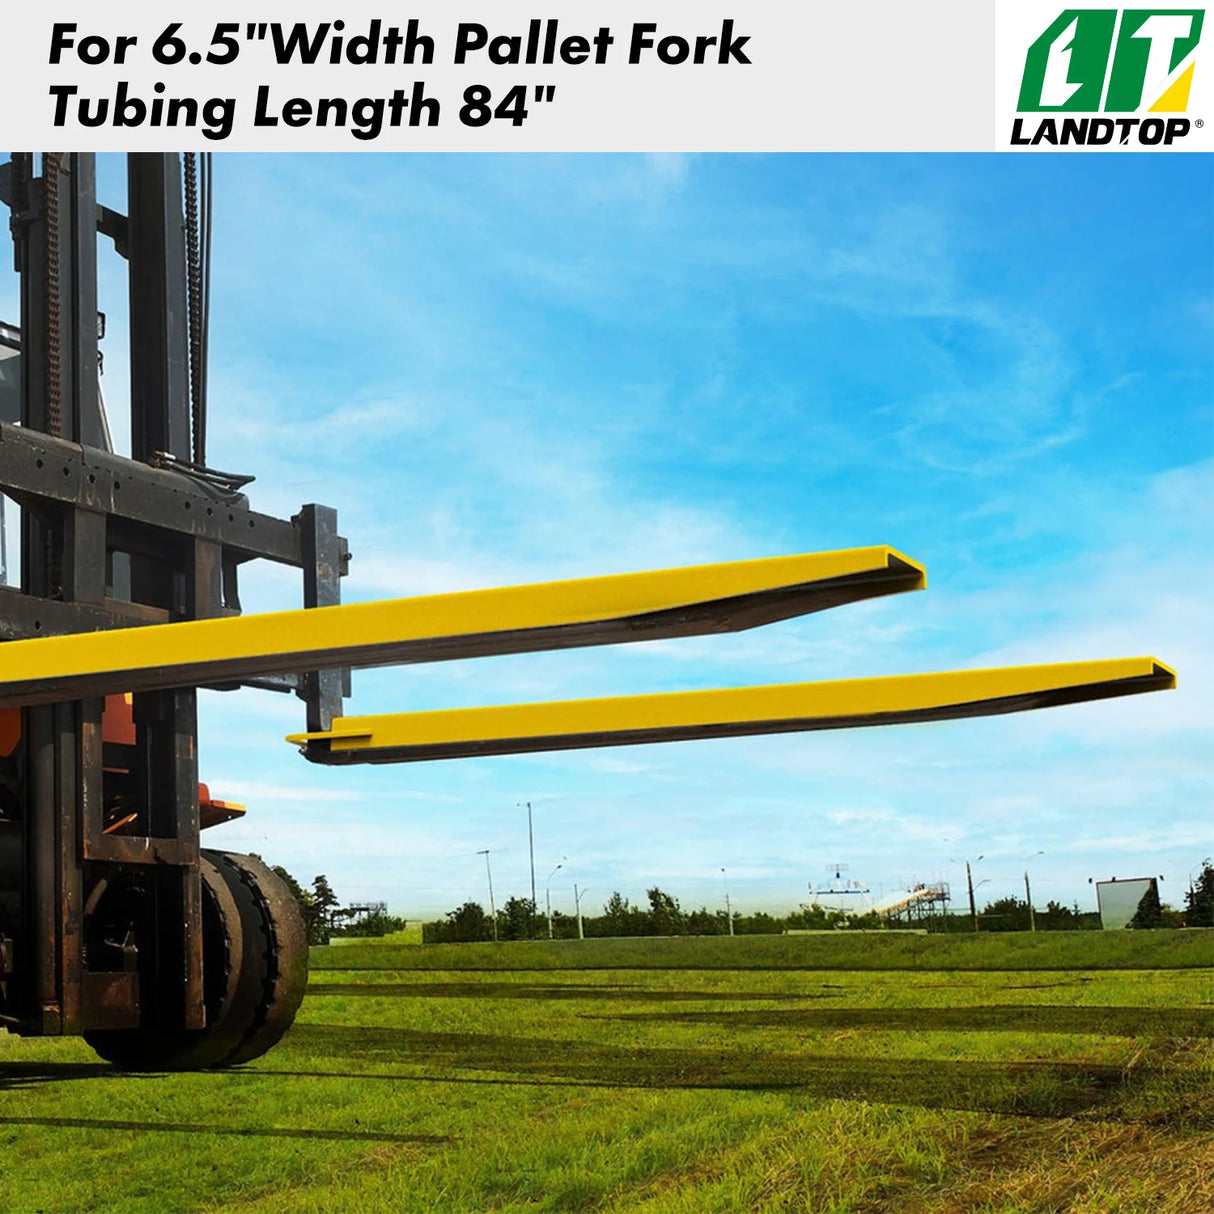 Pallet Forks Extensions 84 Inch Length,Heavy Duty for Forklift,Forklift Extensions 6.5 Inch Width Tractor Skid Steer,Loader Bucket attachments Accessories,Yellow